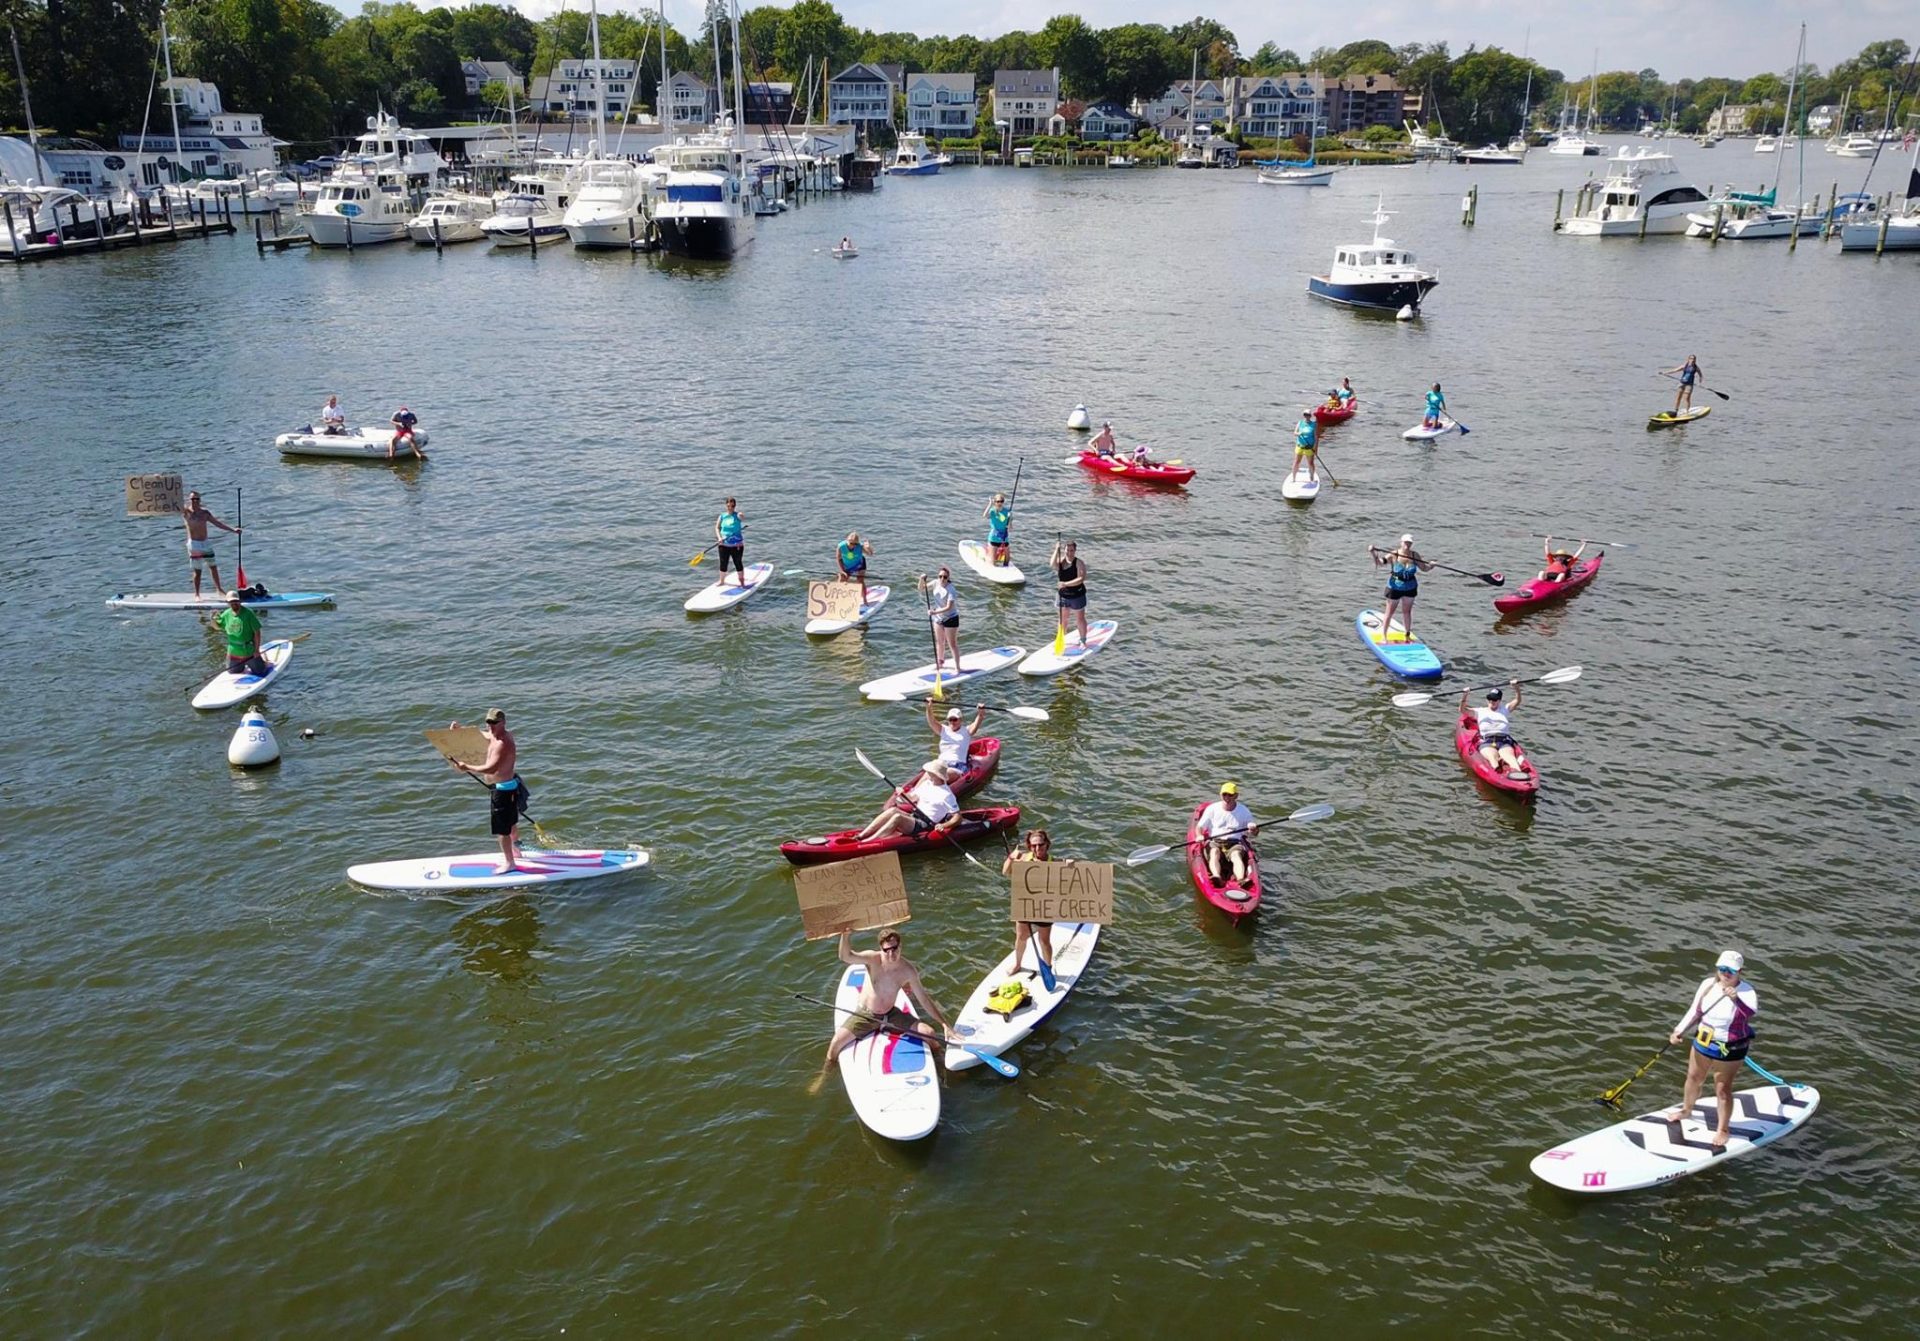 Overhead shot of several stand-up paddlers on the water with signs. One reads "Clean the Creek"